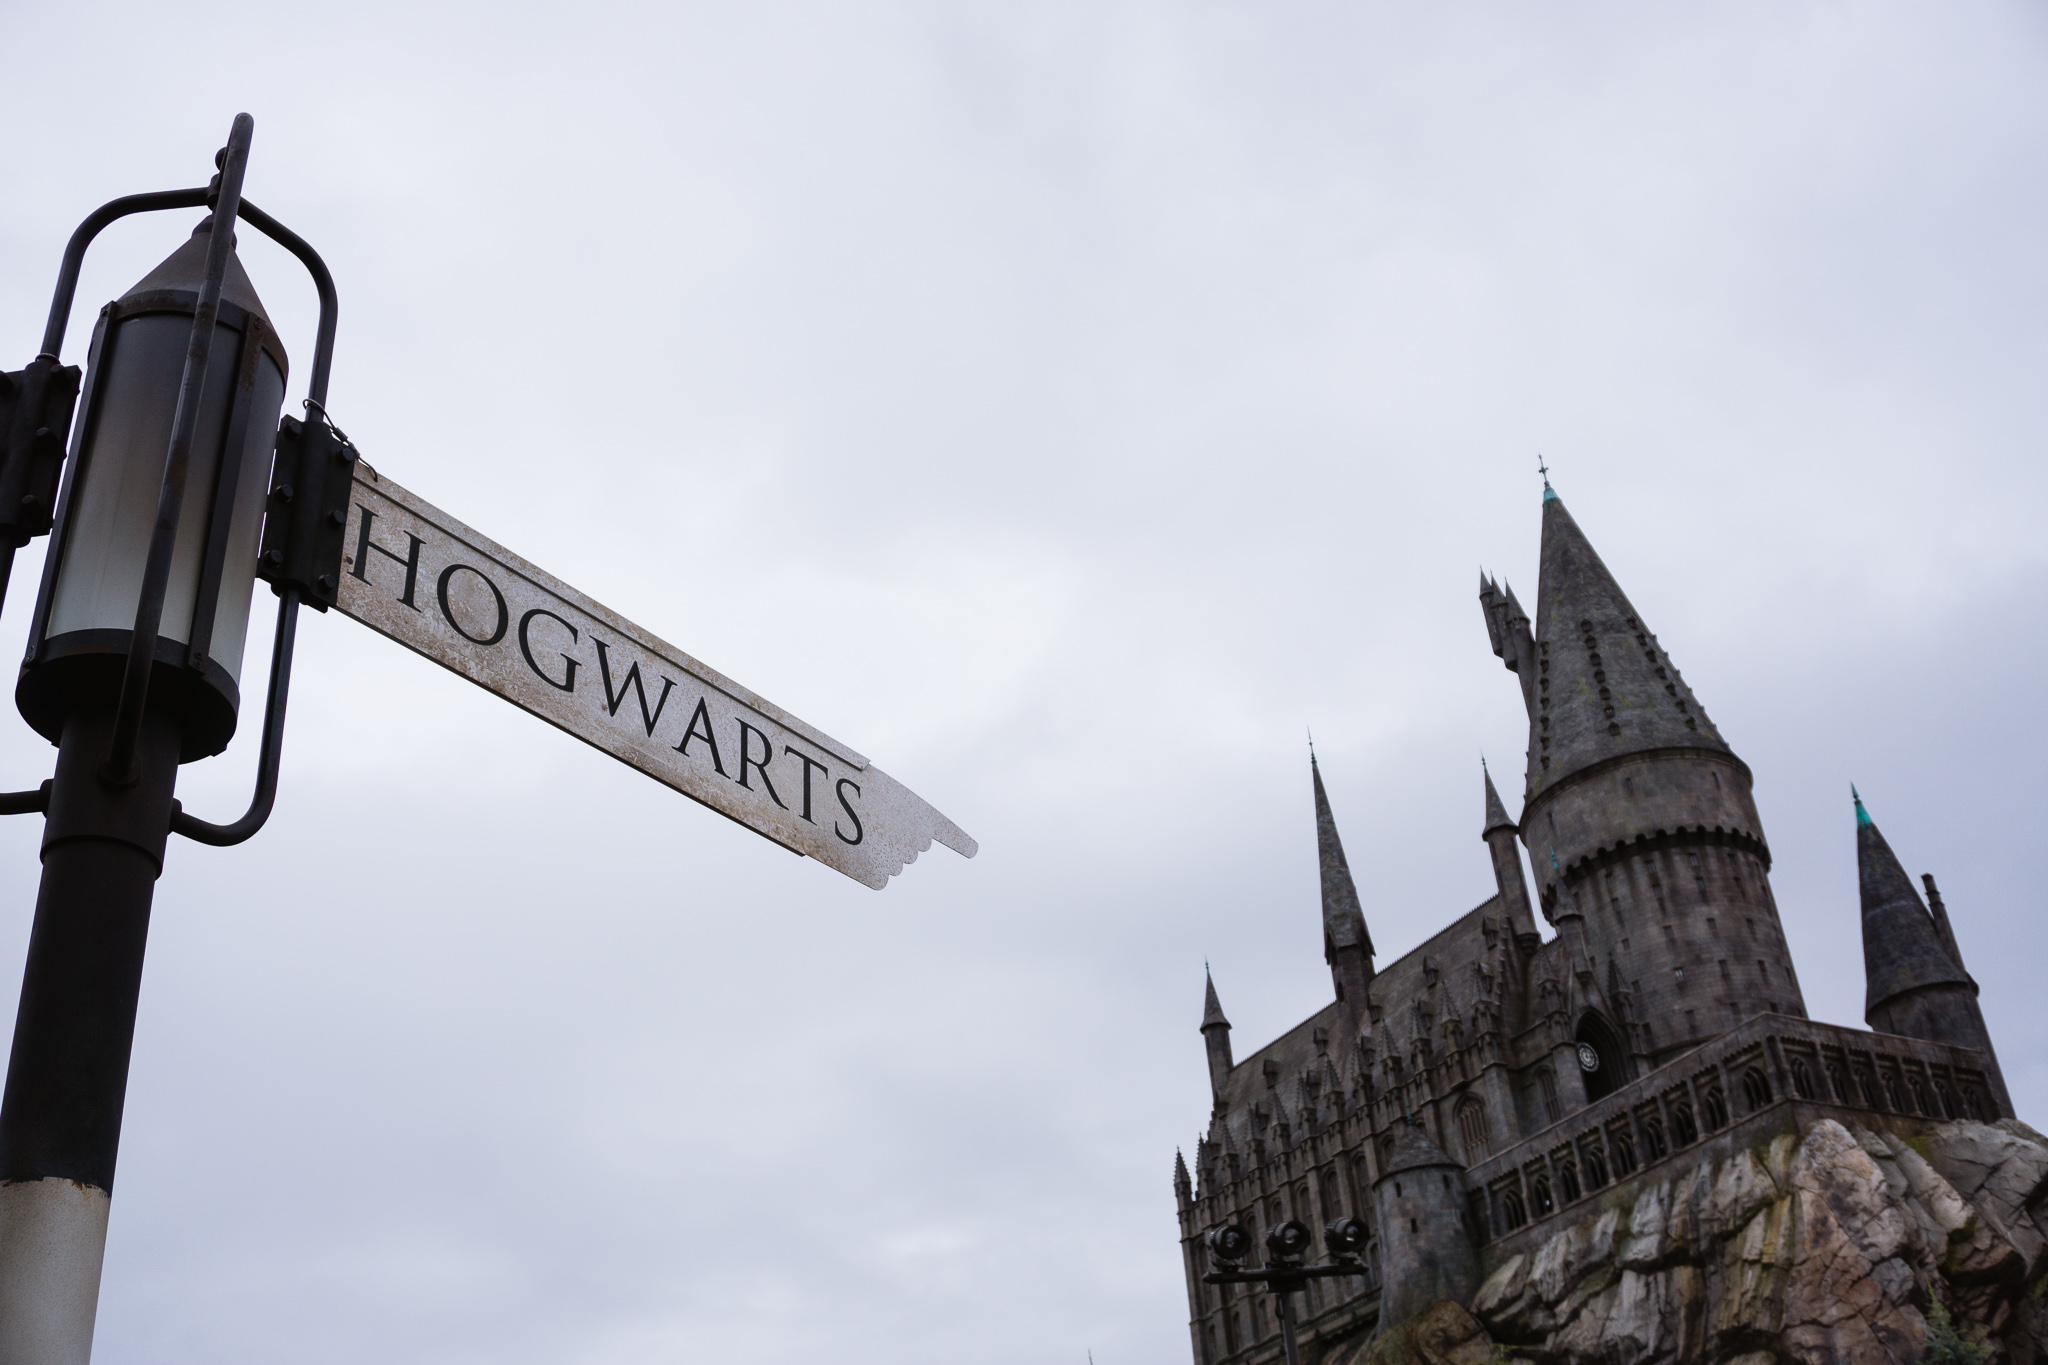 #DateYourSpouse - Wizarding World of Harry Potter